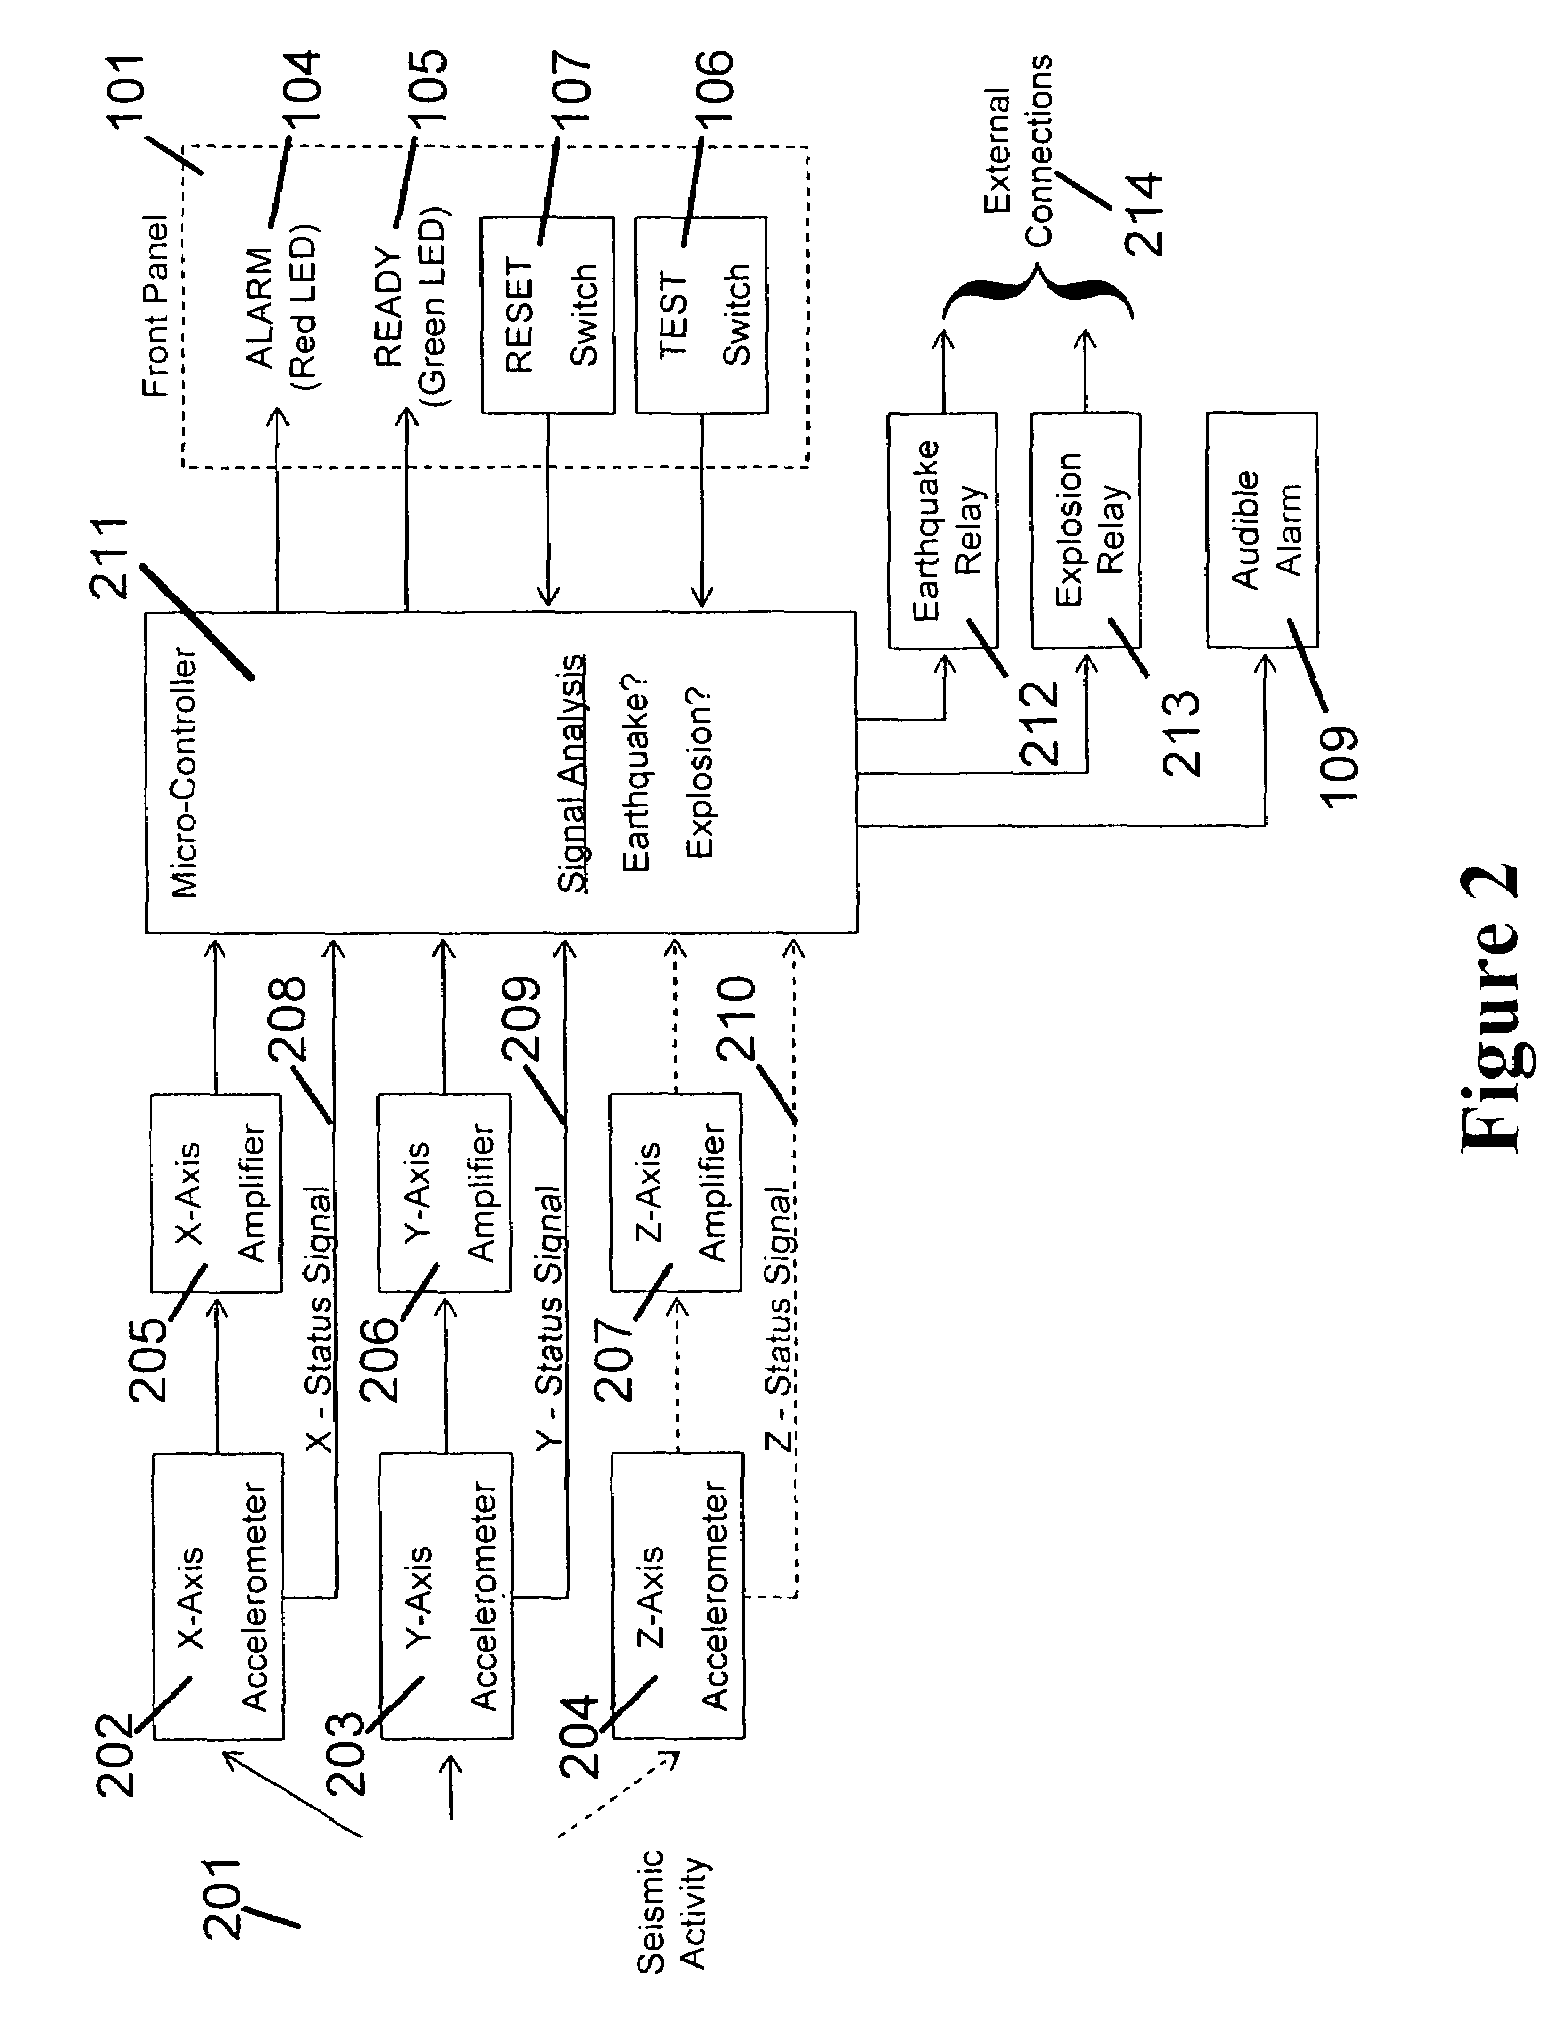 Seismic detection system and a method of operating the same